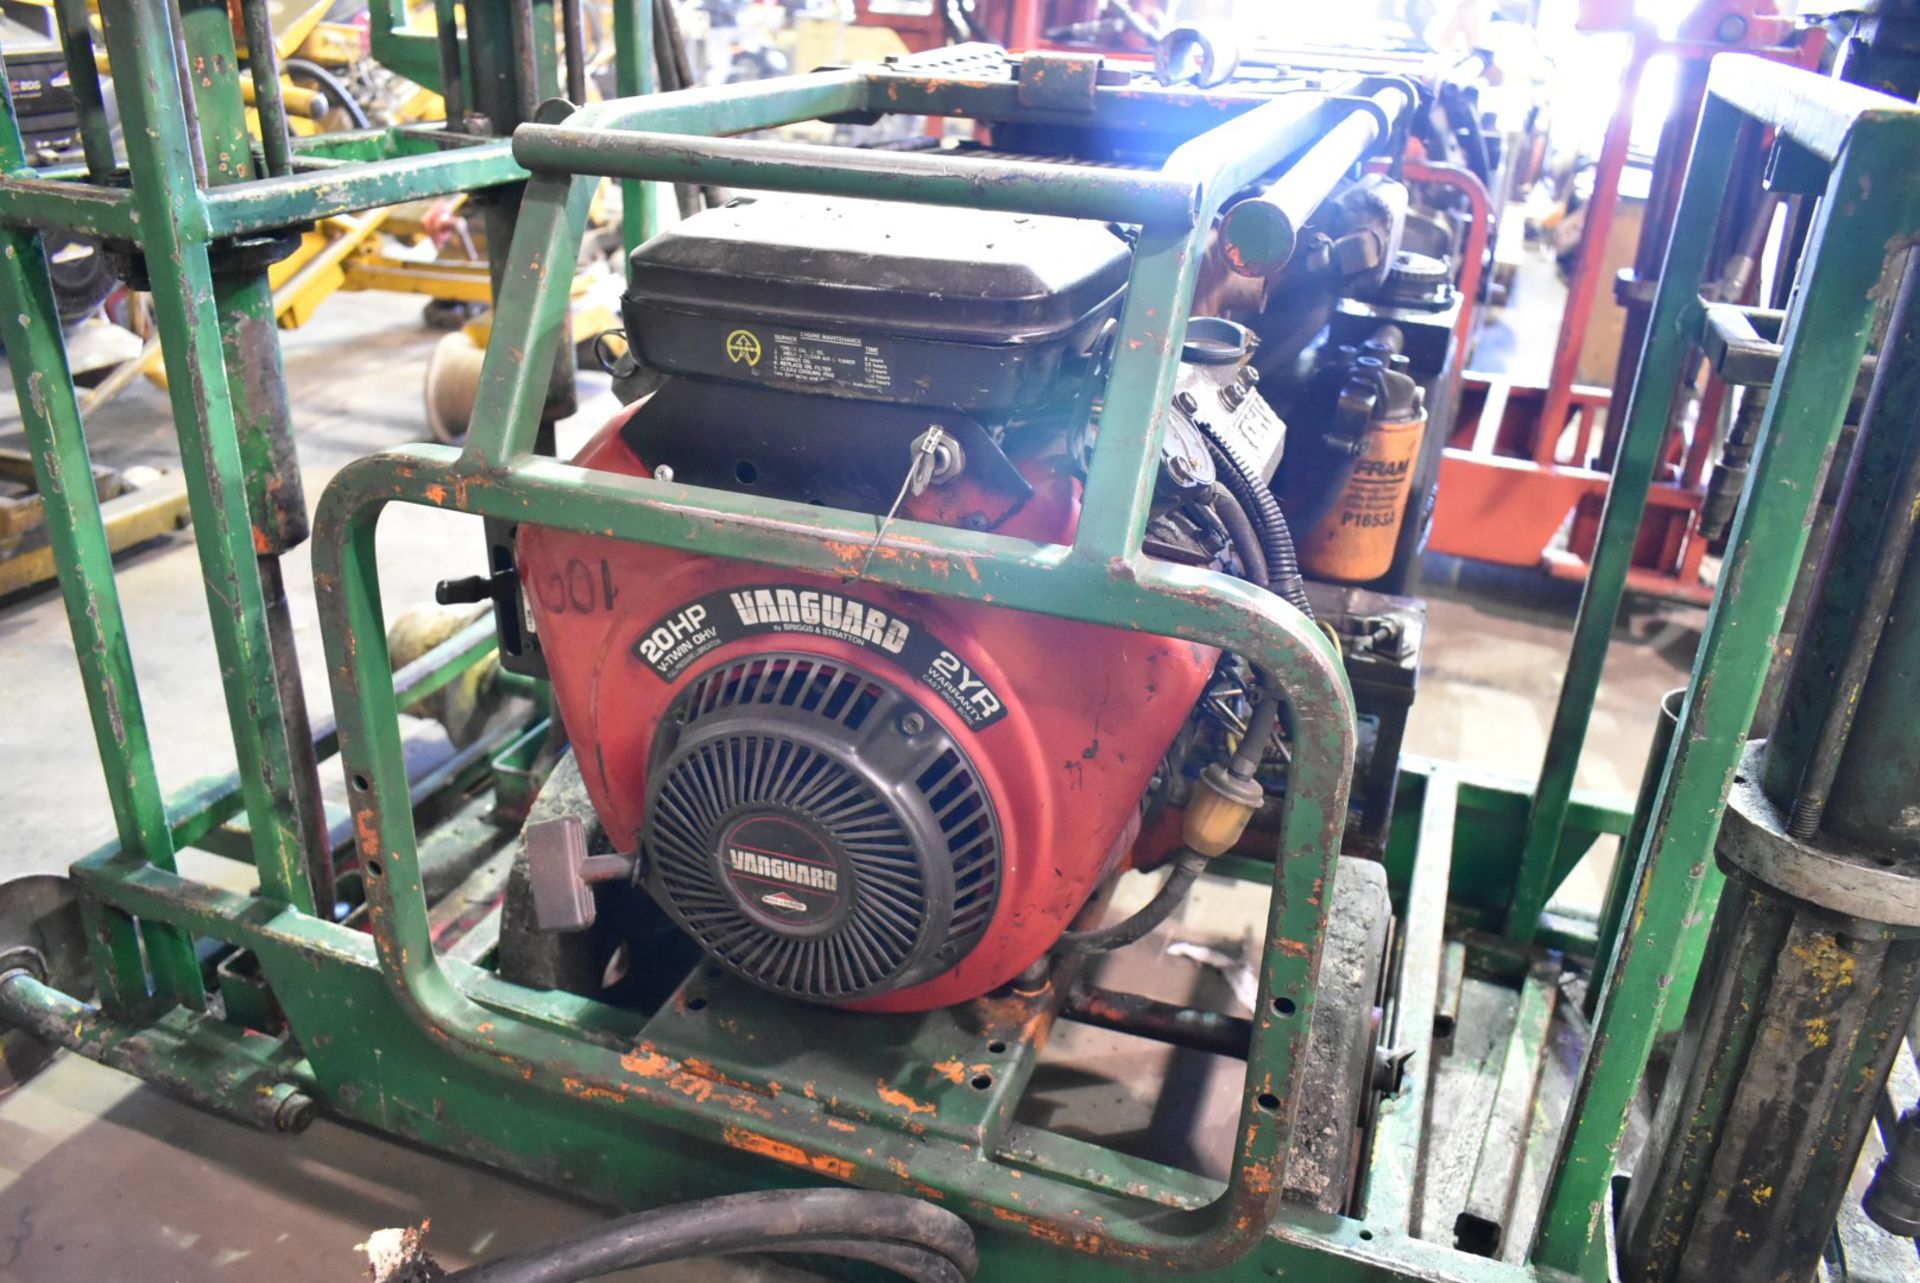 MFG N/A RAIL CART MOUNTED PORTABLE HYDRAULIC POWER PACK WITH VANGUARD 20HP GAS ENGINE S/N: N/A - Image 4 of 4